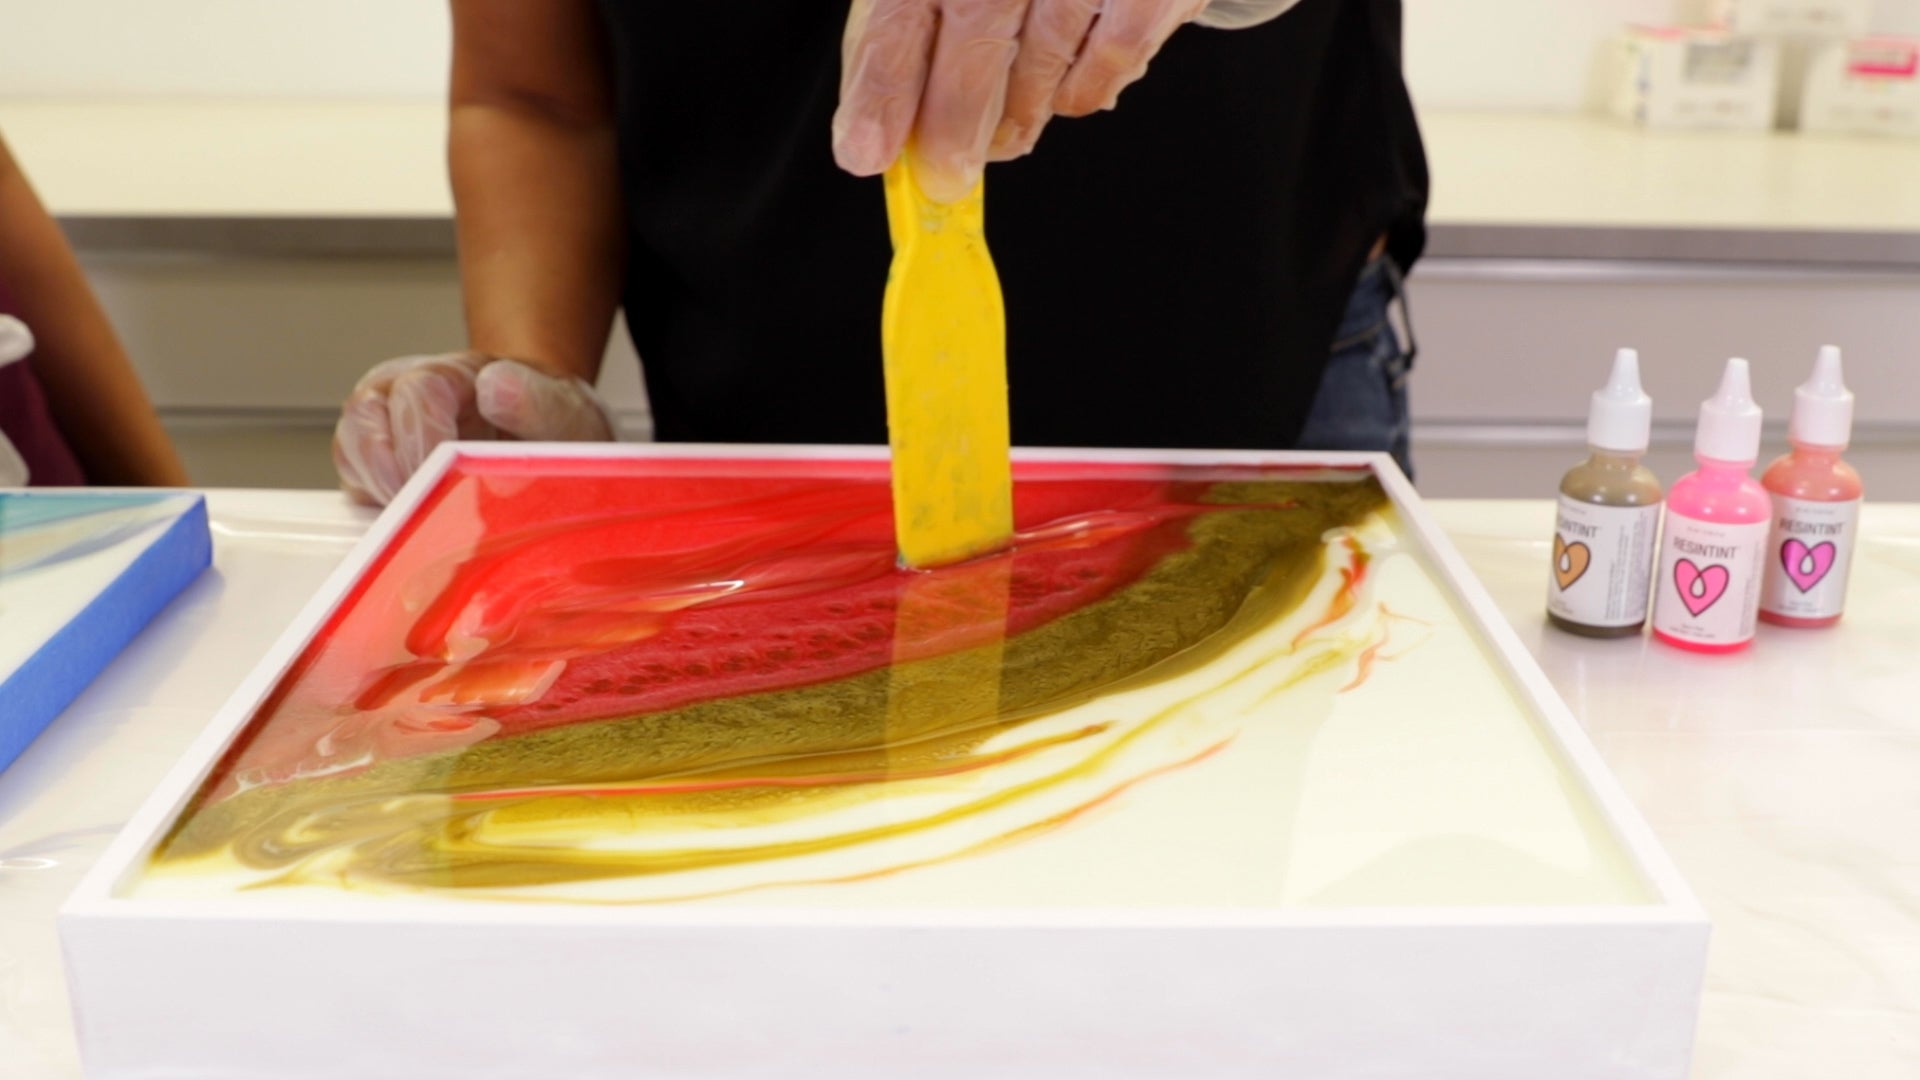 Create Resin Flow Art - spatula to blend the colours and create some motion